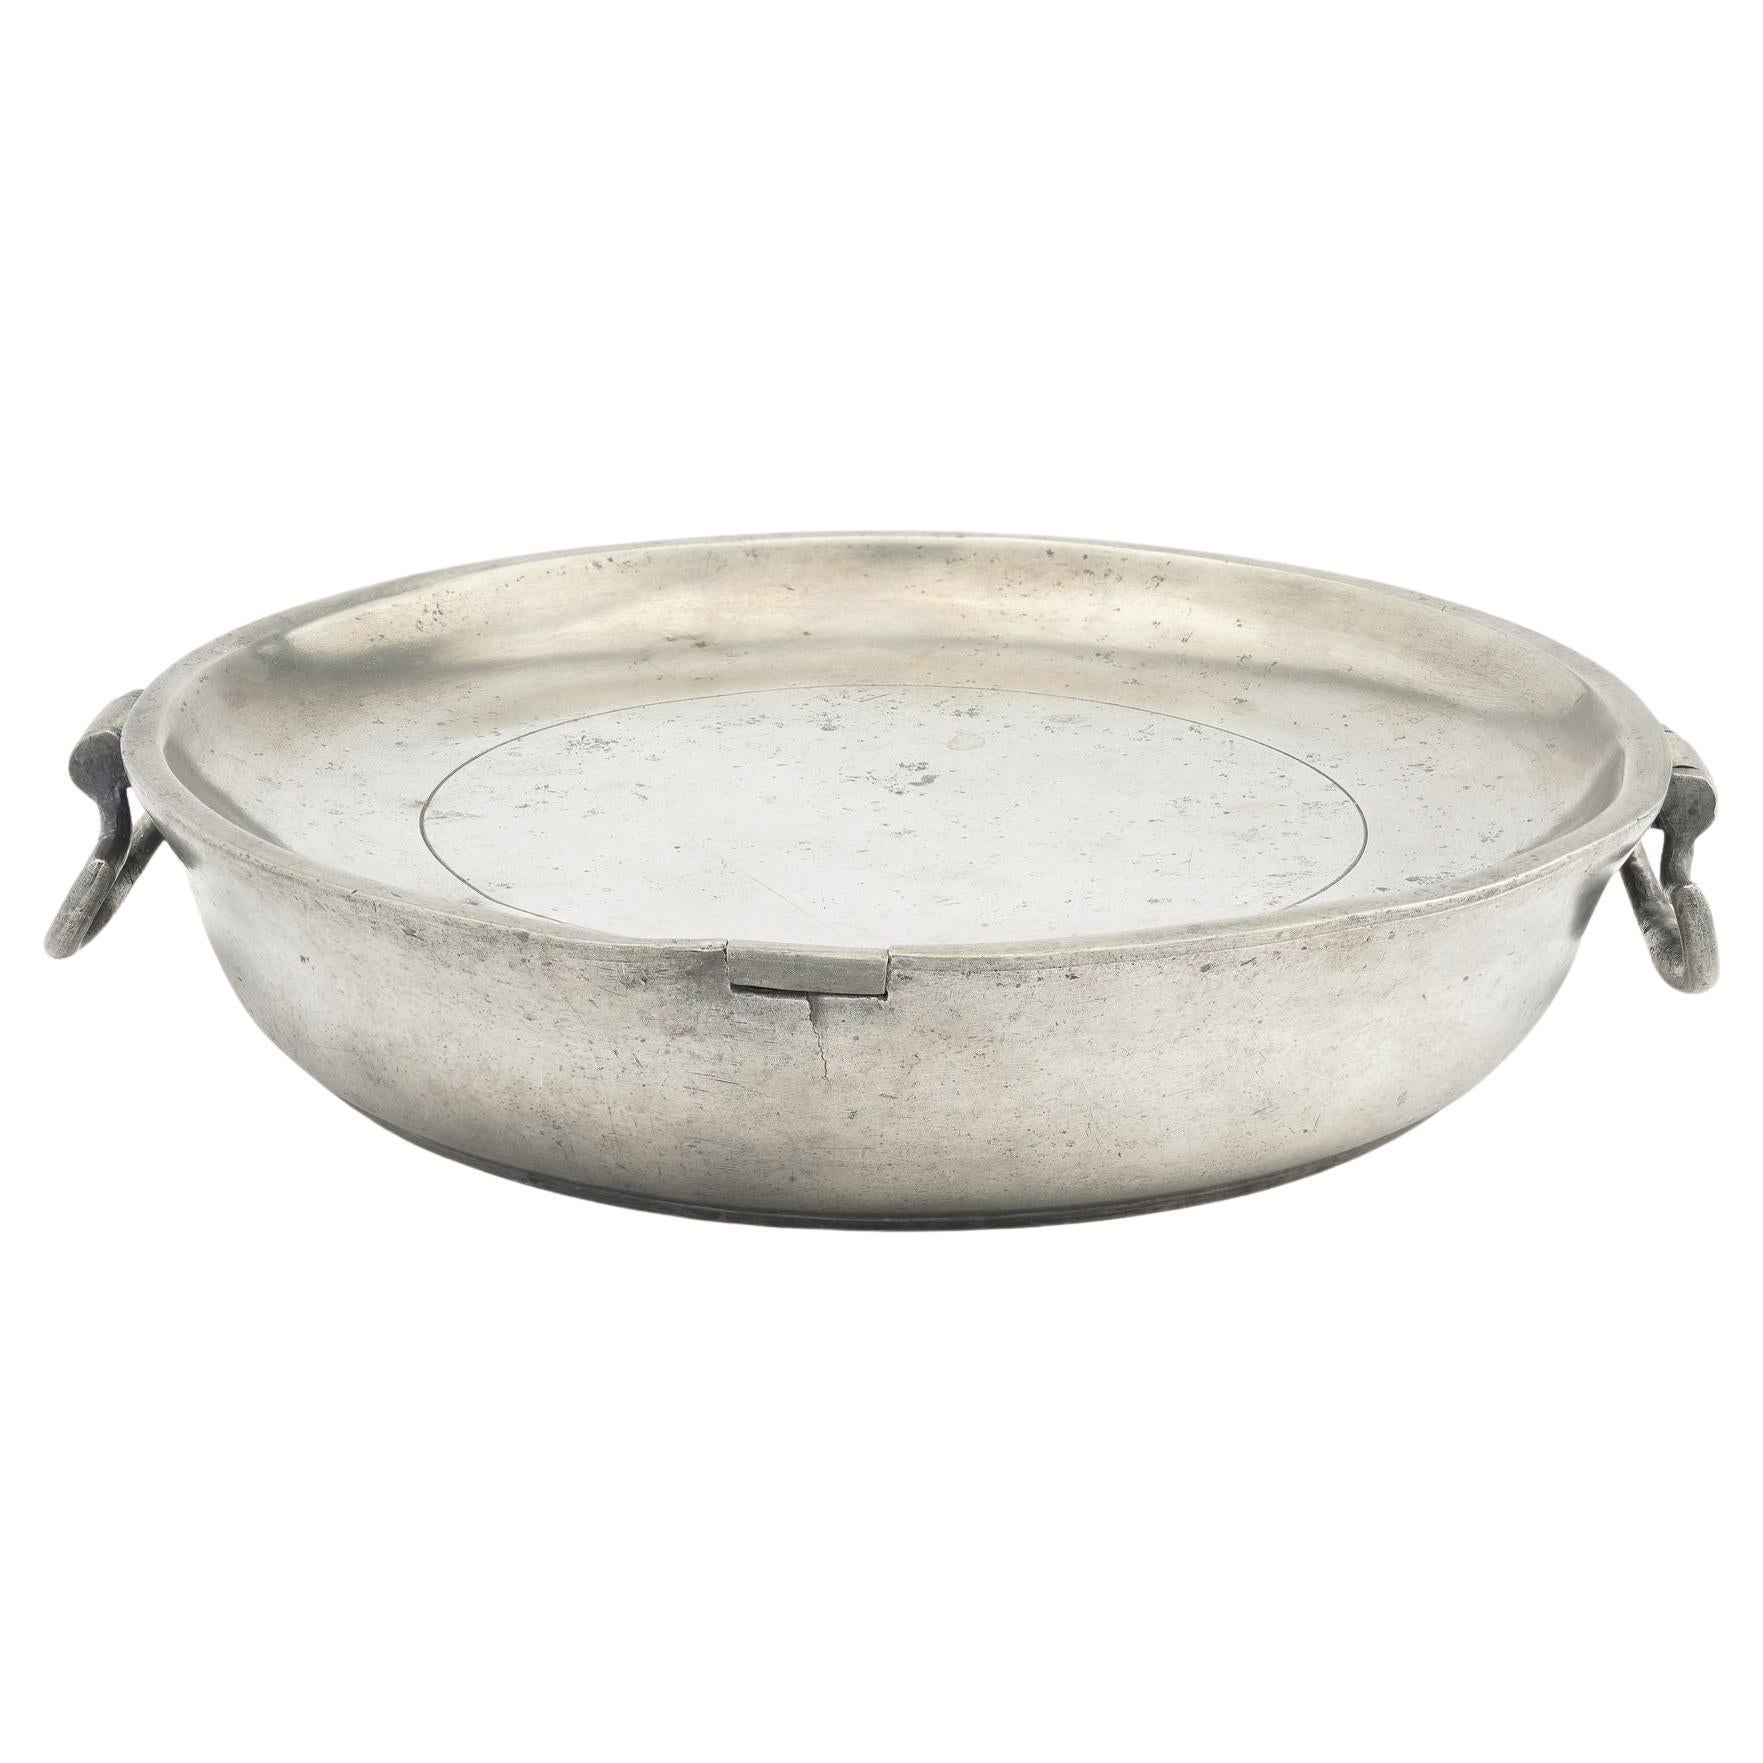 English pewter warming plate with drop handles by V&W Birmingham, 1808-1827 For Sale